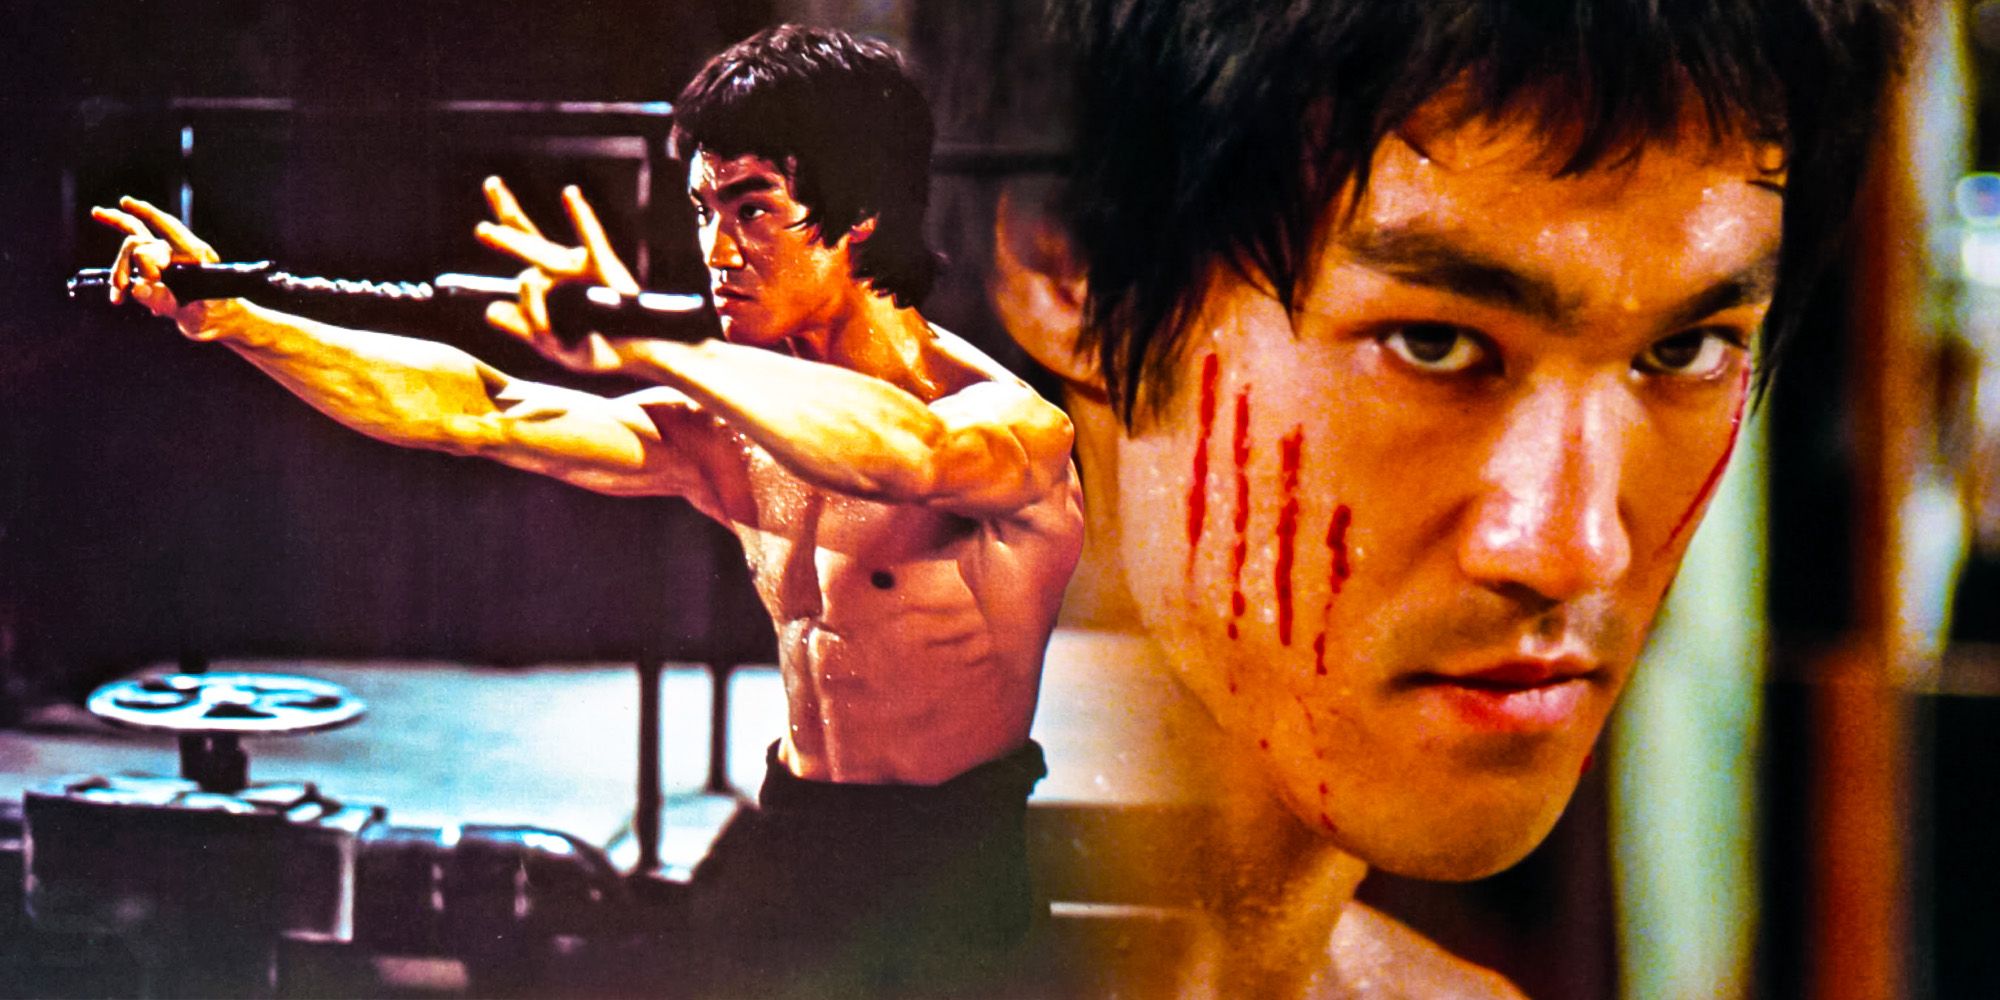 Bruce Lee Hated Nunchucks - So Why Did He Adopt Them Later On?